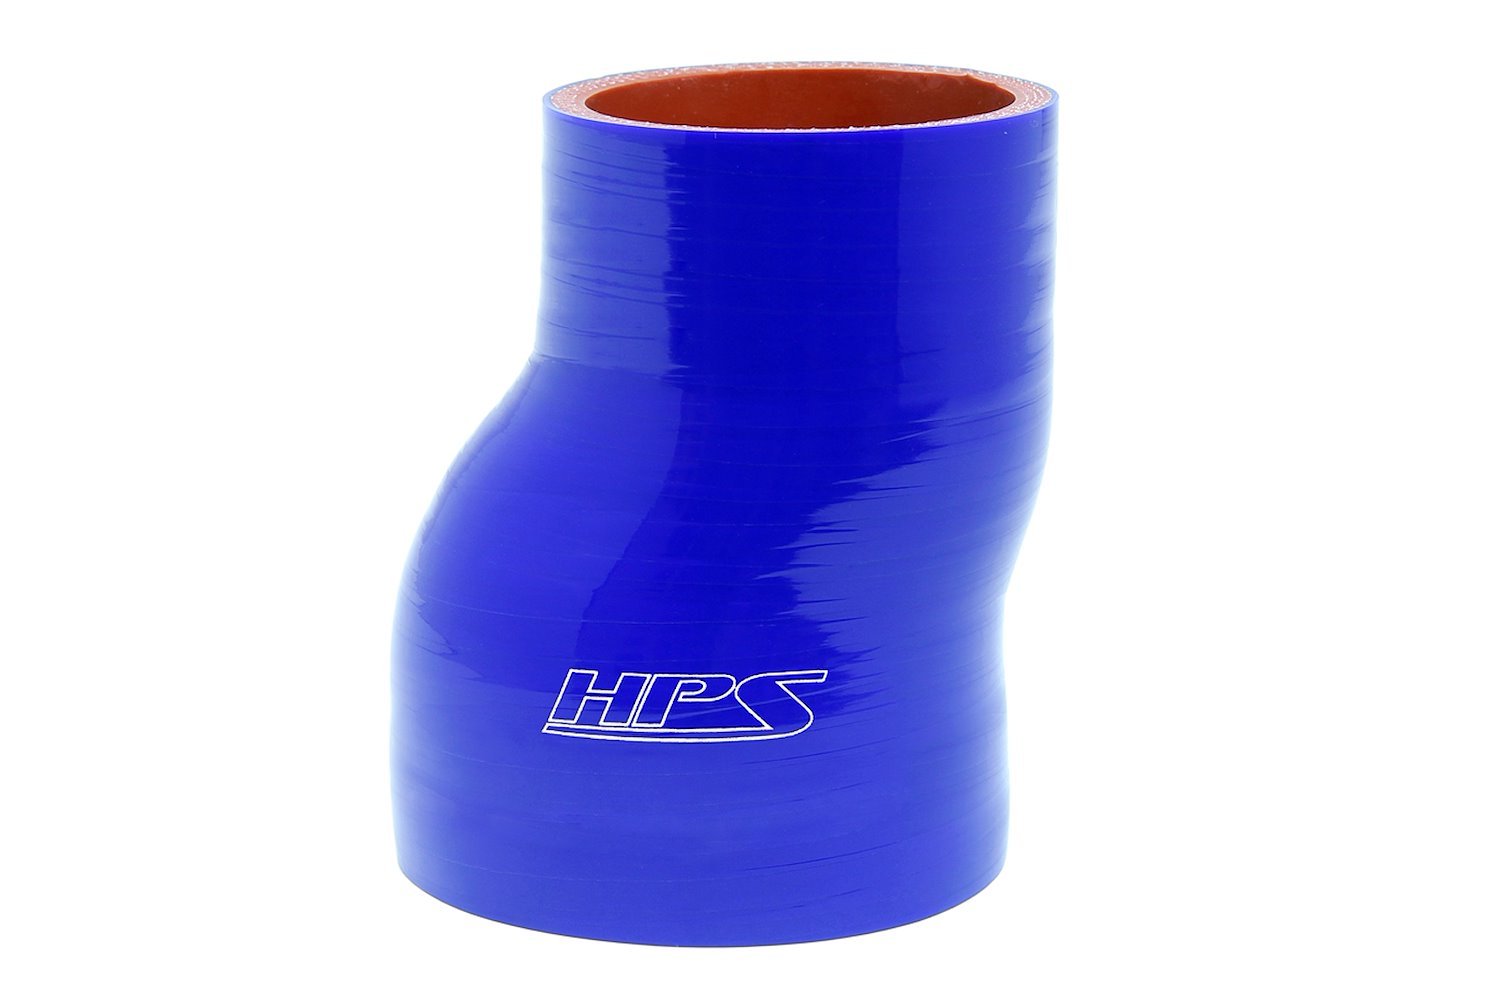 HTSOR-200-250-L6-BLUE Silicone Offset Reducer Hose, High-Temp Reinforced, 2 in. - 2-1/2 in. ID, 6 in. Long, Blue